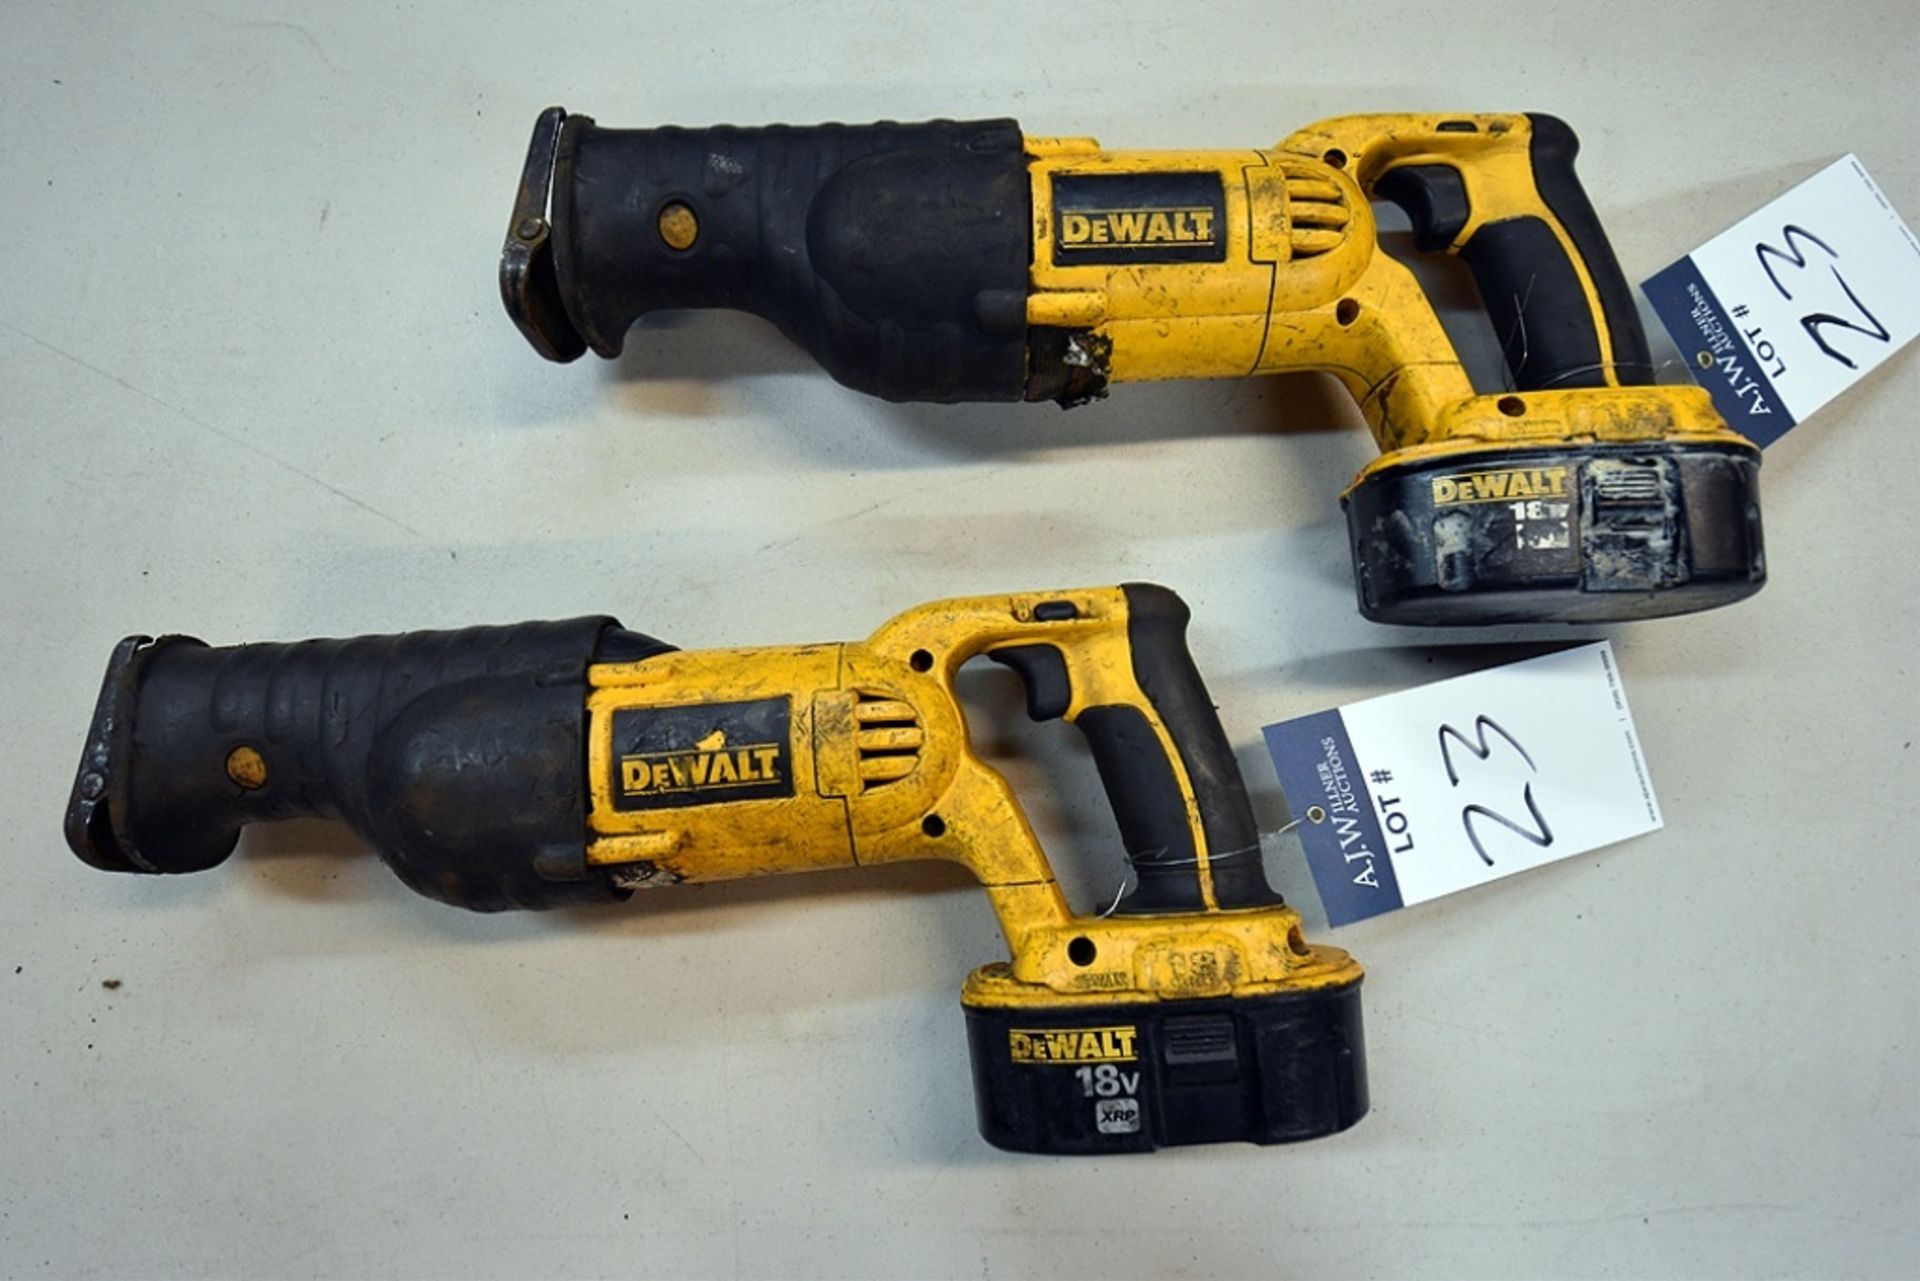 DeWalt DC385 Variable Speed Reciprocating Saws 18v w/ (4) Batteries and (2) Chargers